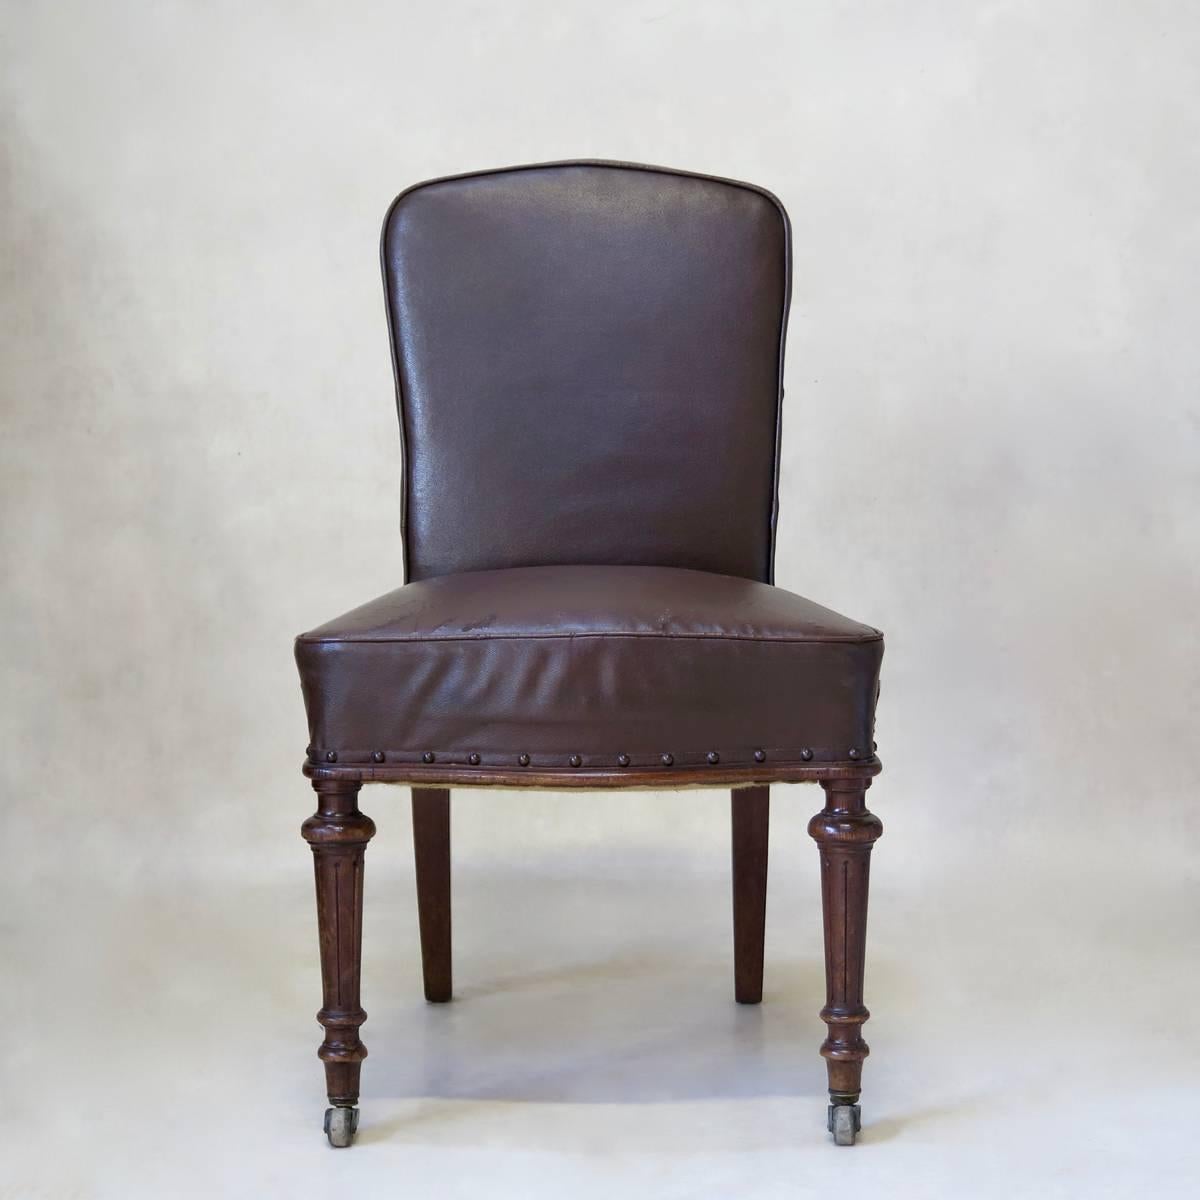 Handsome 19th century desk chair raised on turned front legs, on original brass casters and saber back legs. Upholstered in original antique faux-leather, with nail-head trim.